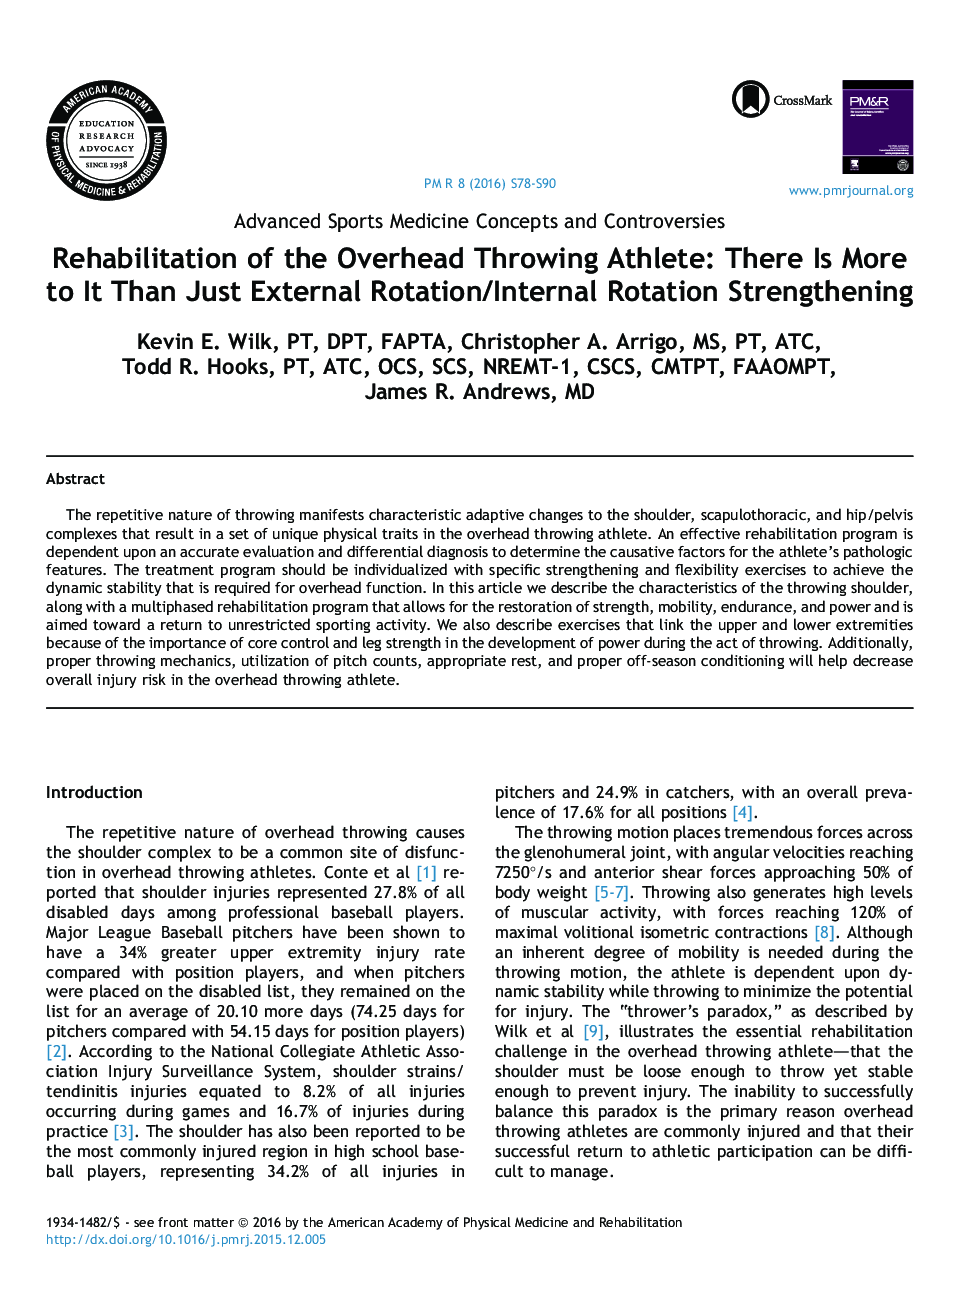 Rehabilitation of the Overhead Throwing Athlete: There Is More to It Than Just External Rotation/Internal Rotation Strengthening